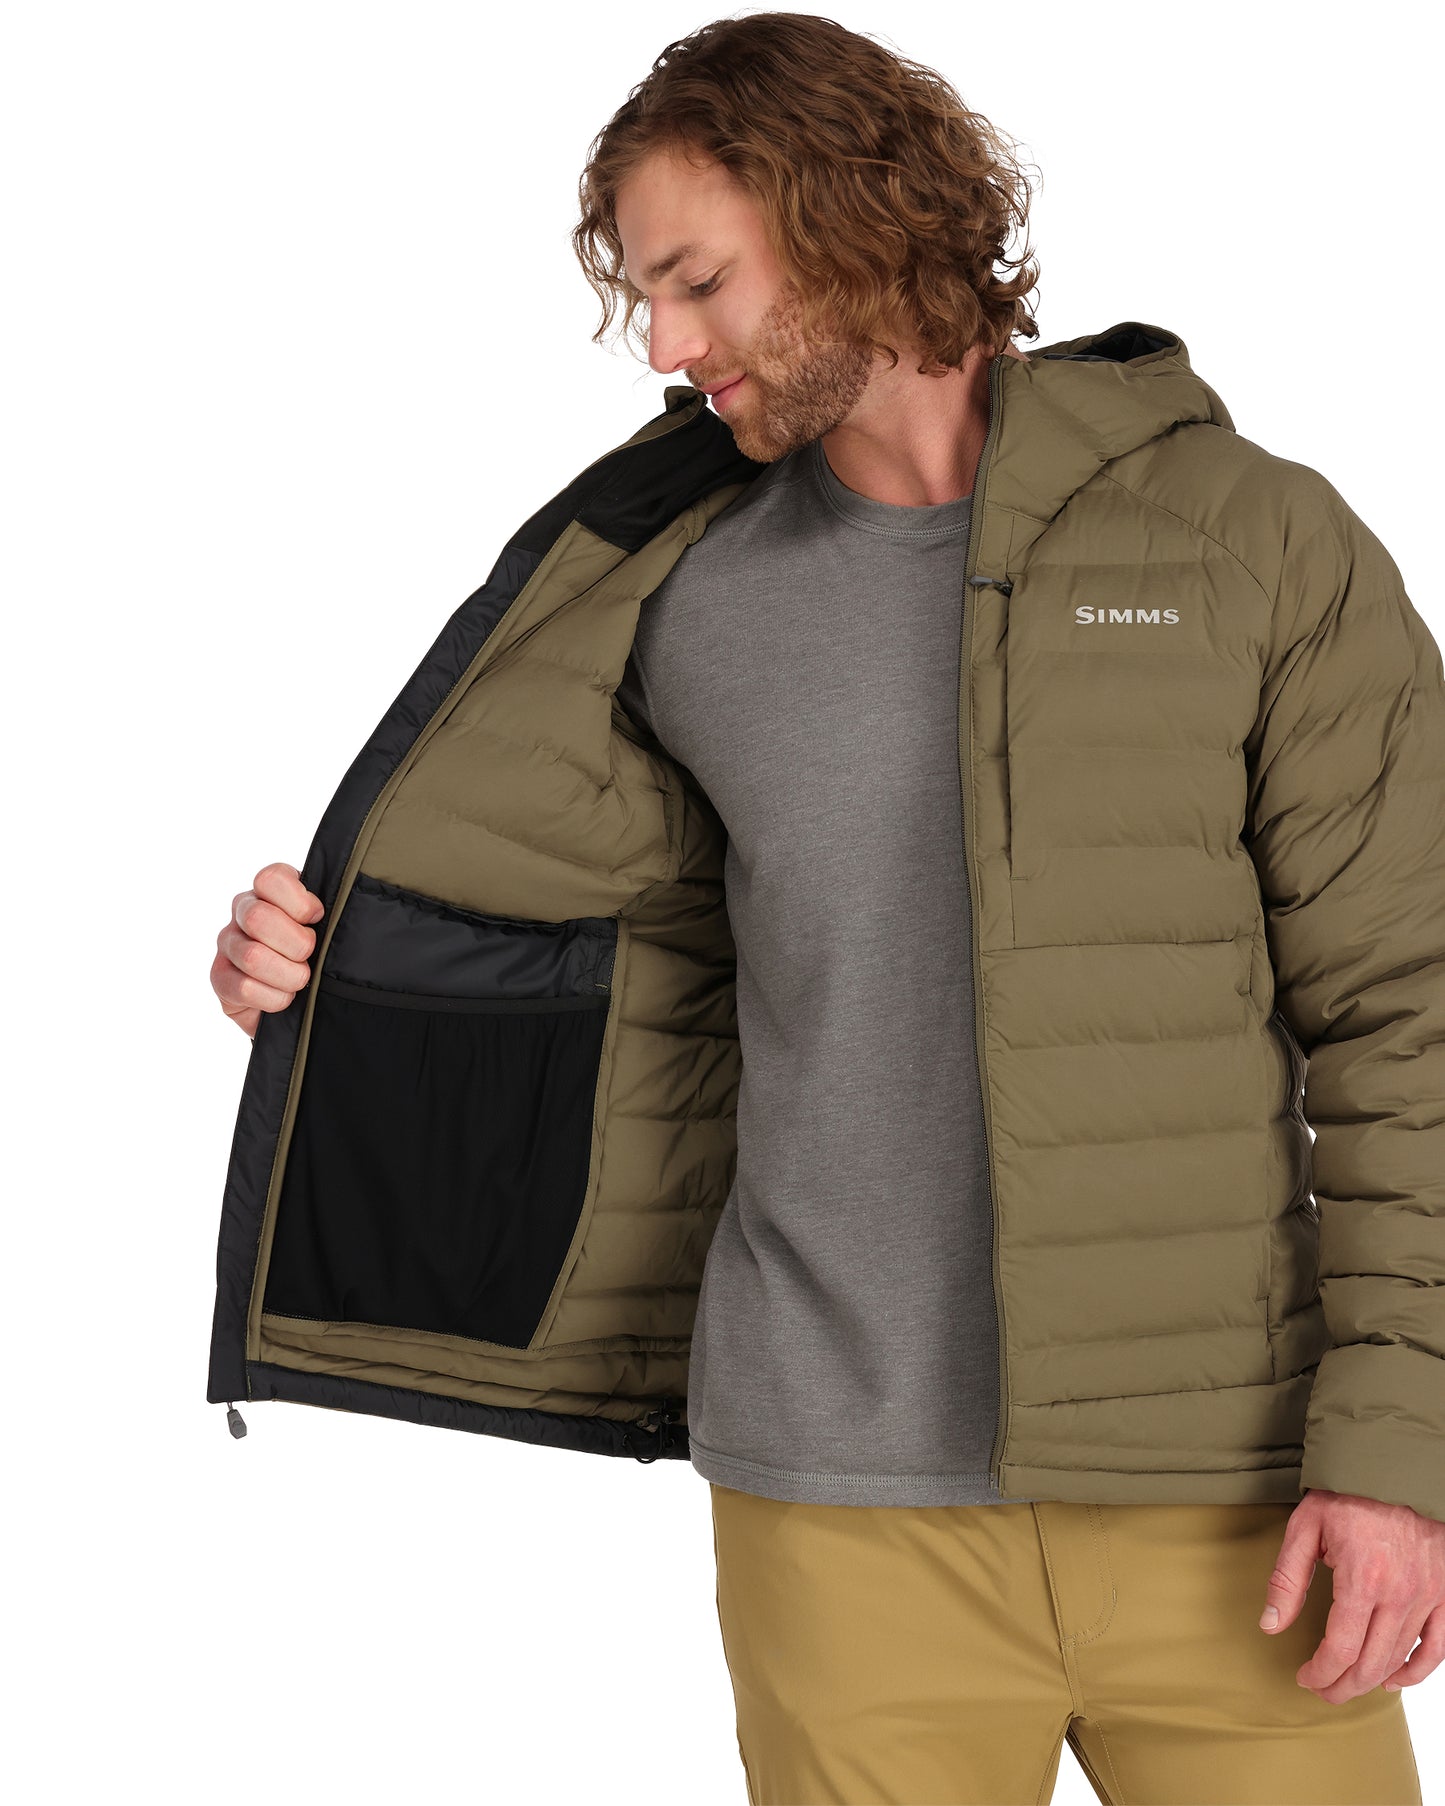 Exstream Hooded Jacket- On Body- front